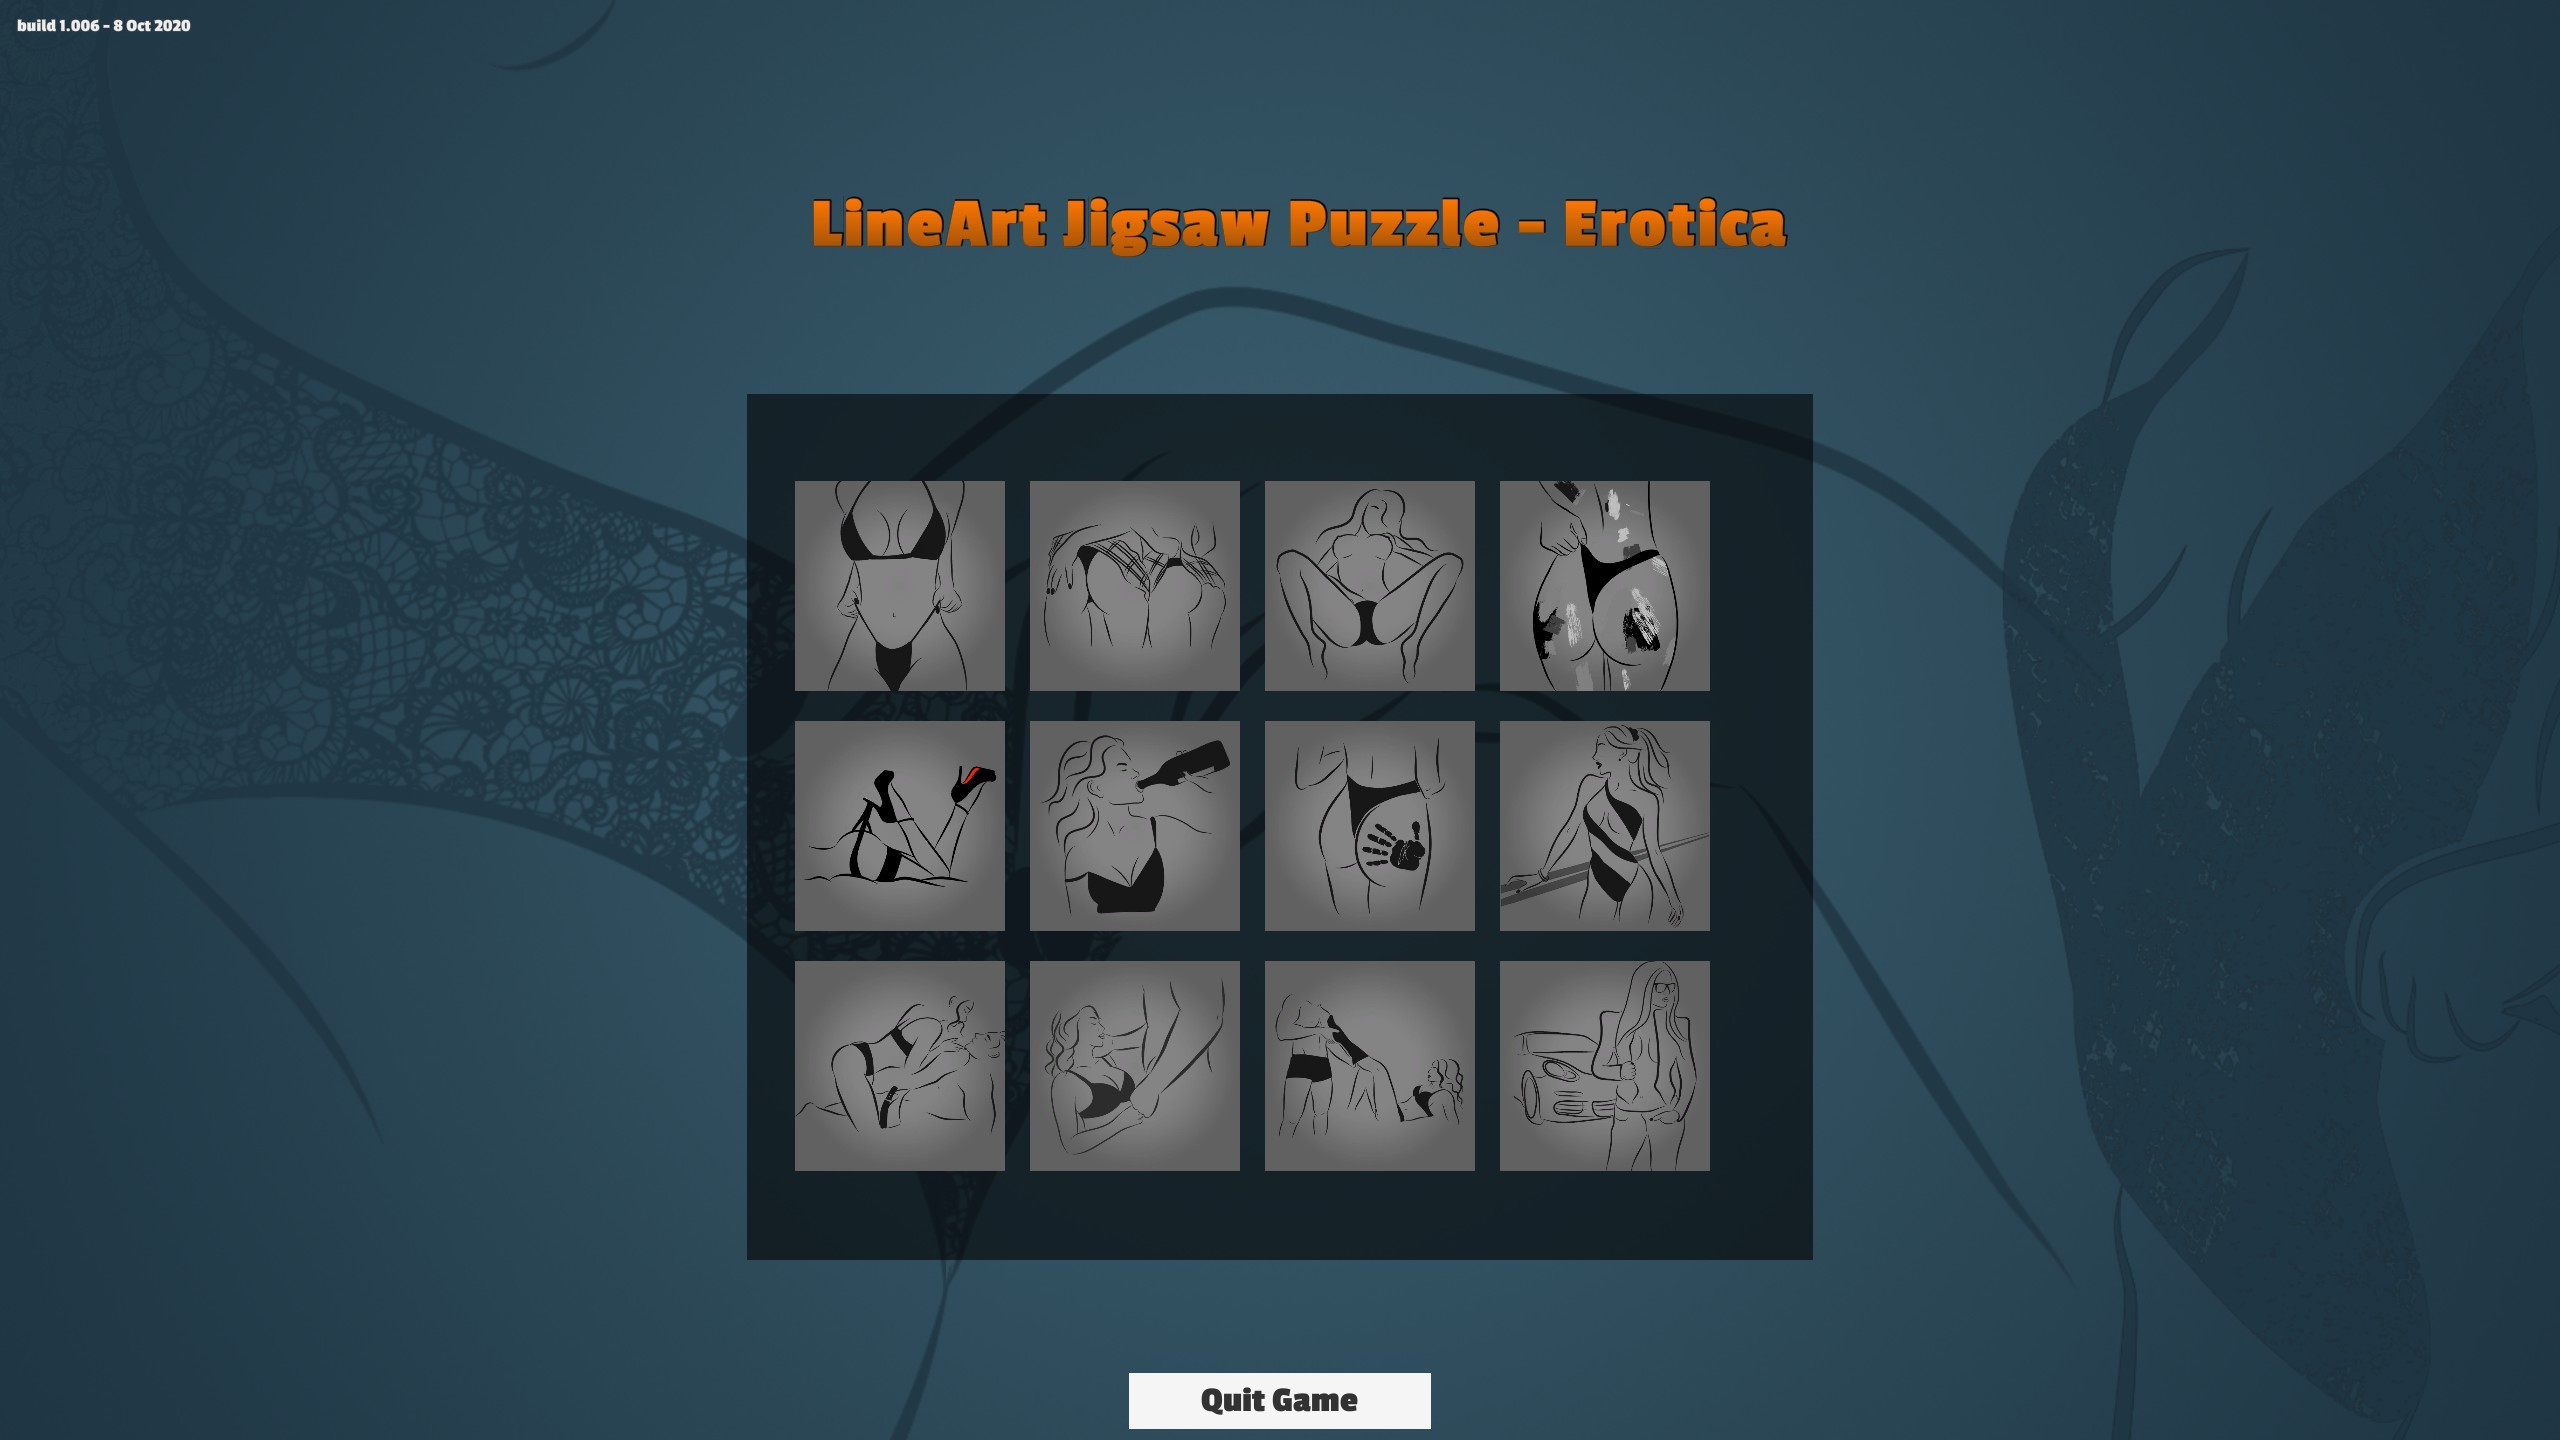 LineArt Jigsaw Puzzle - Erotica Steam CD Key, $0.21